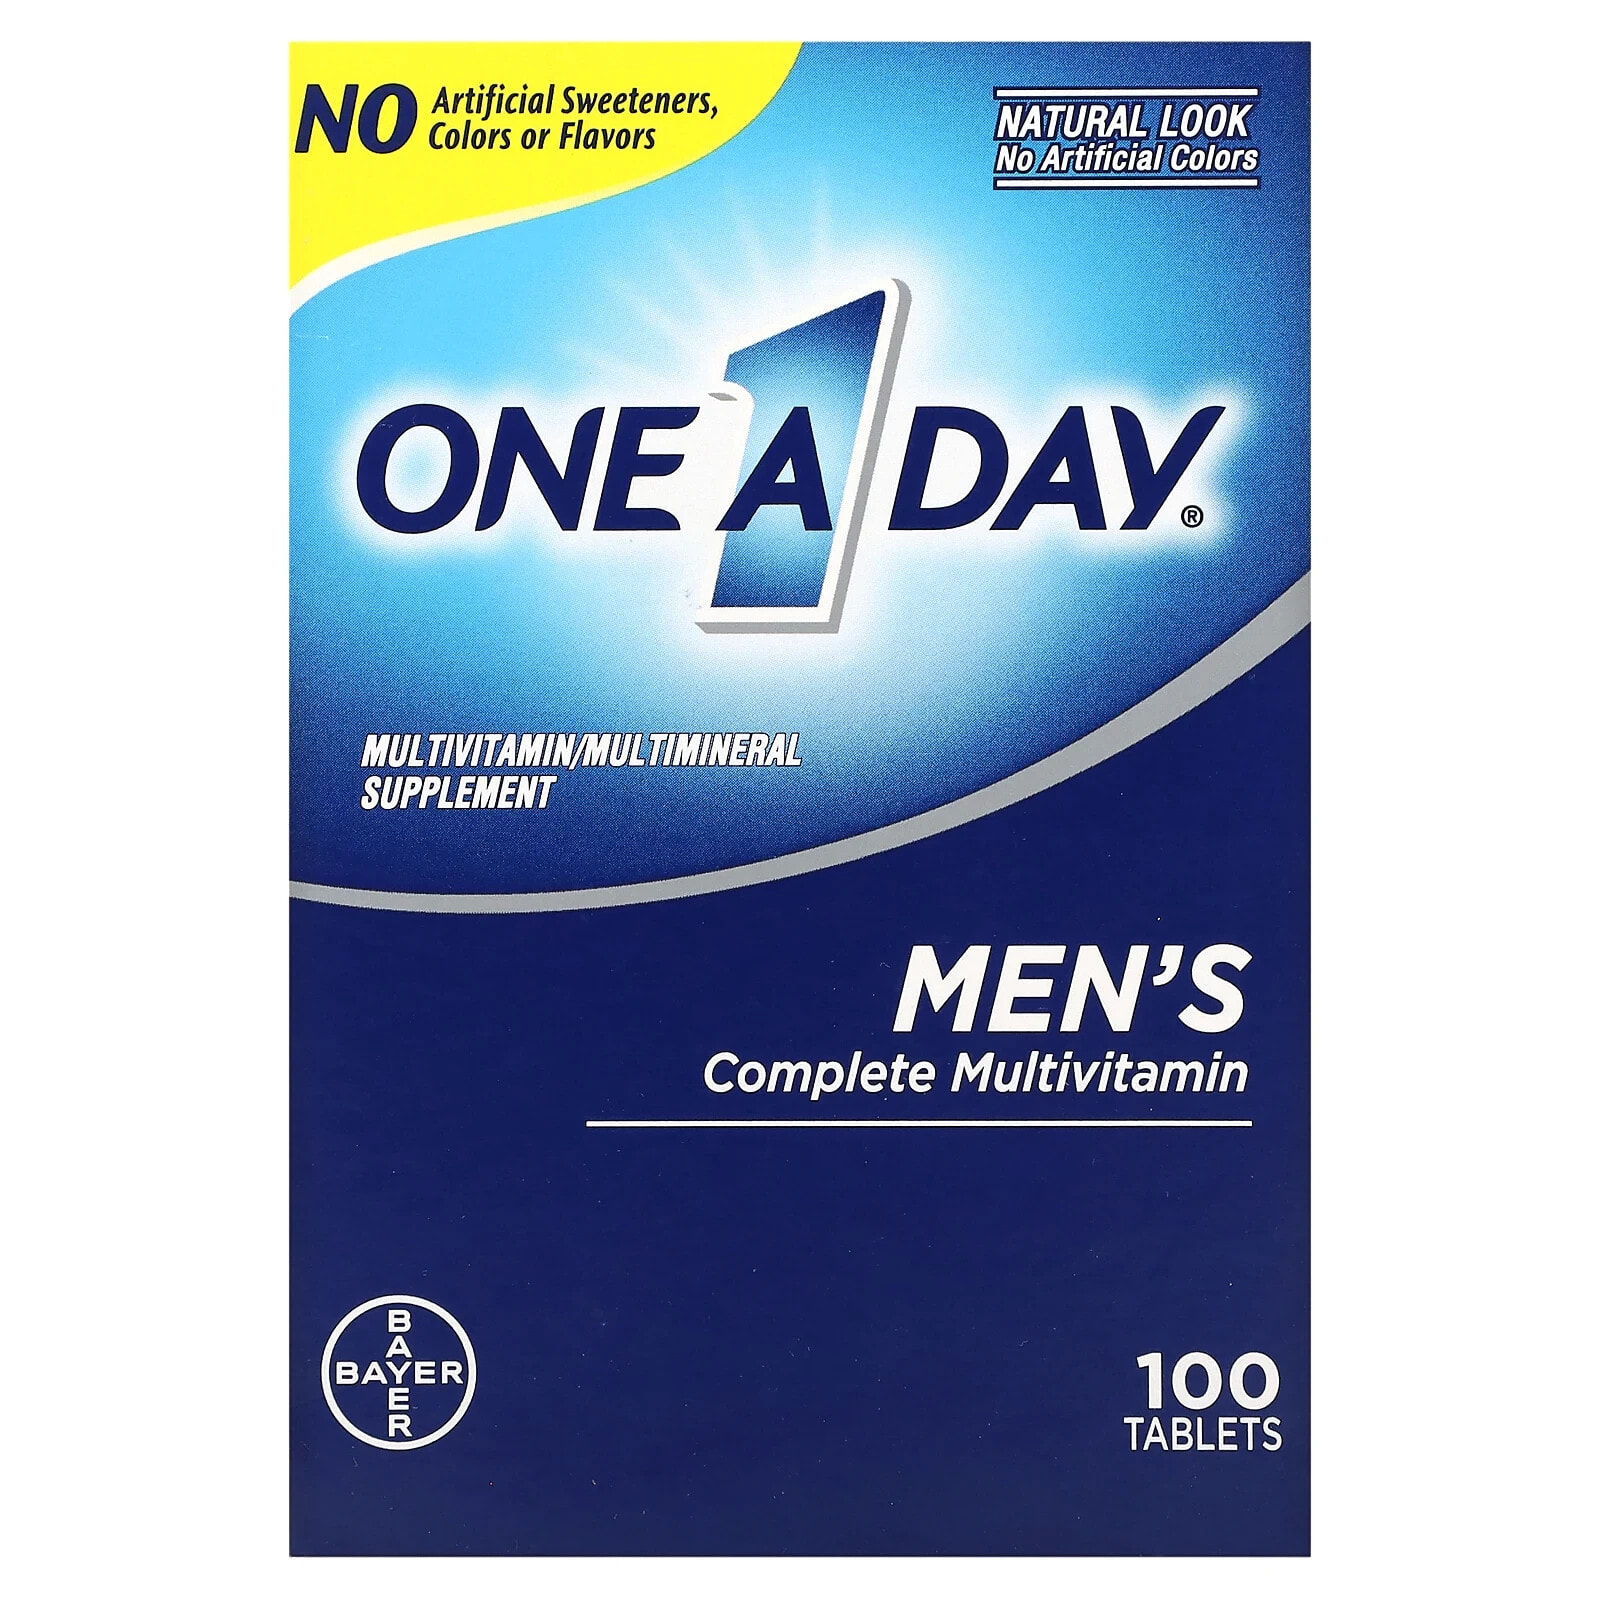 One-A-Day, Men's Complete Multivitamin, 200 Tablets